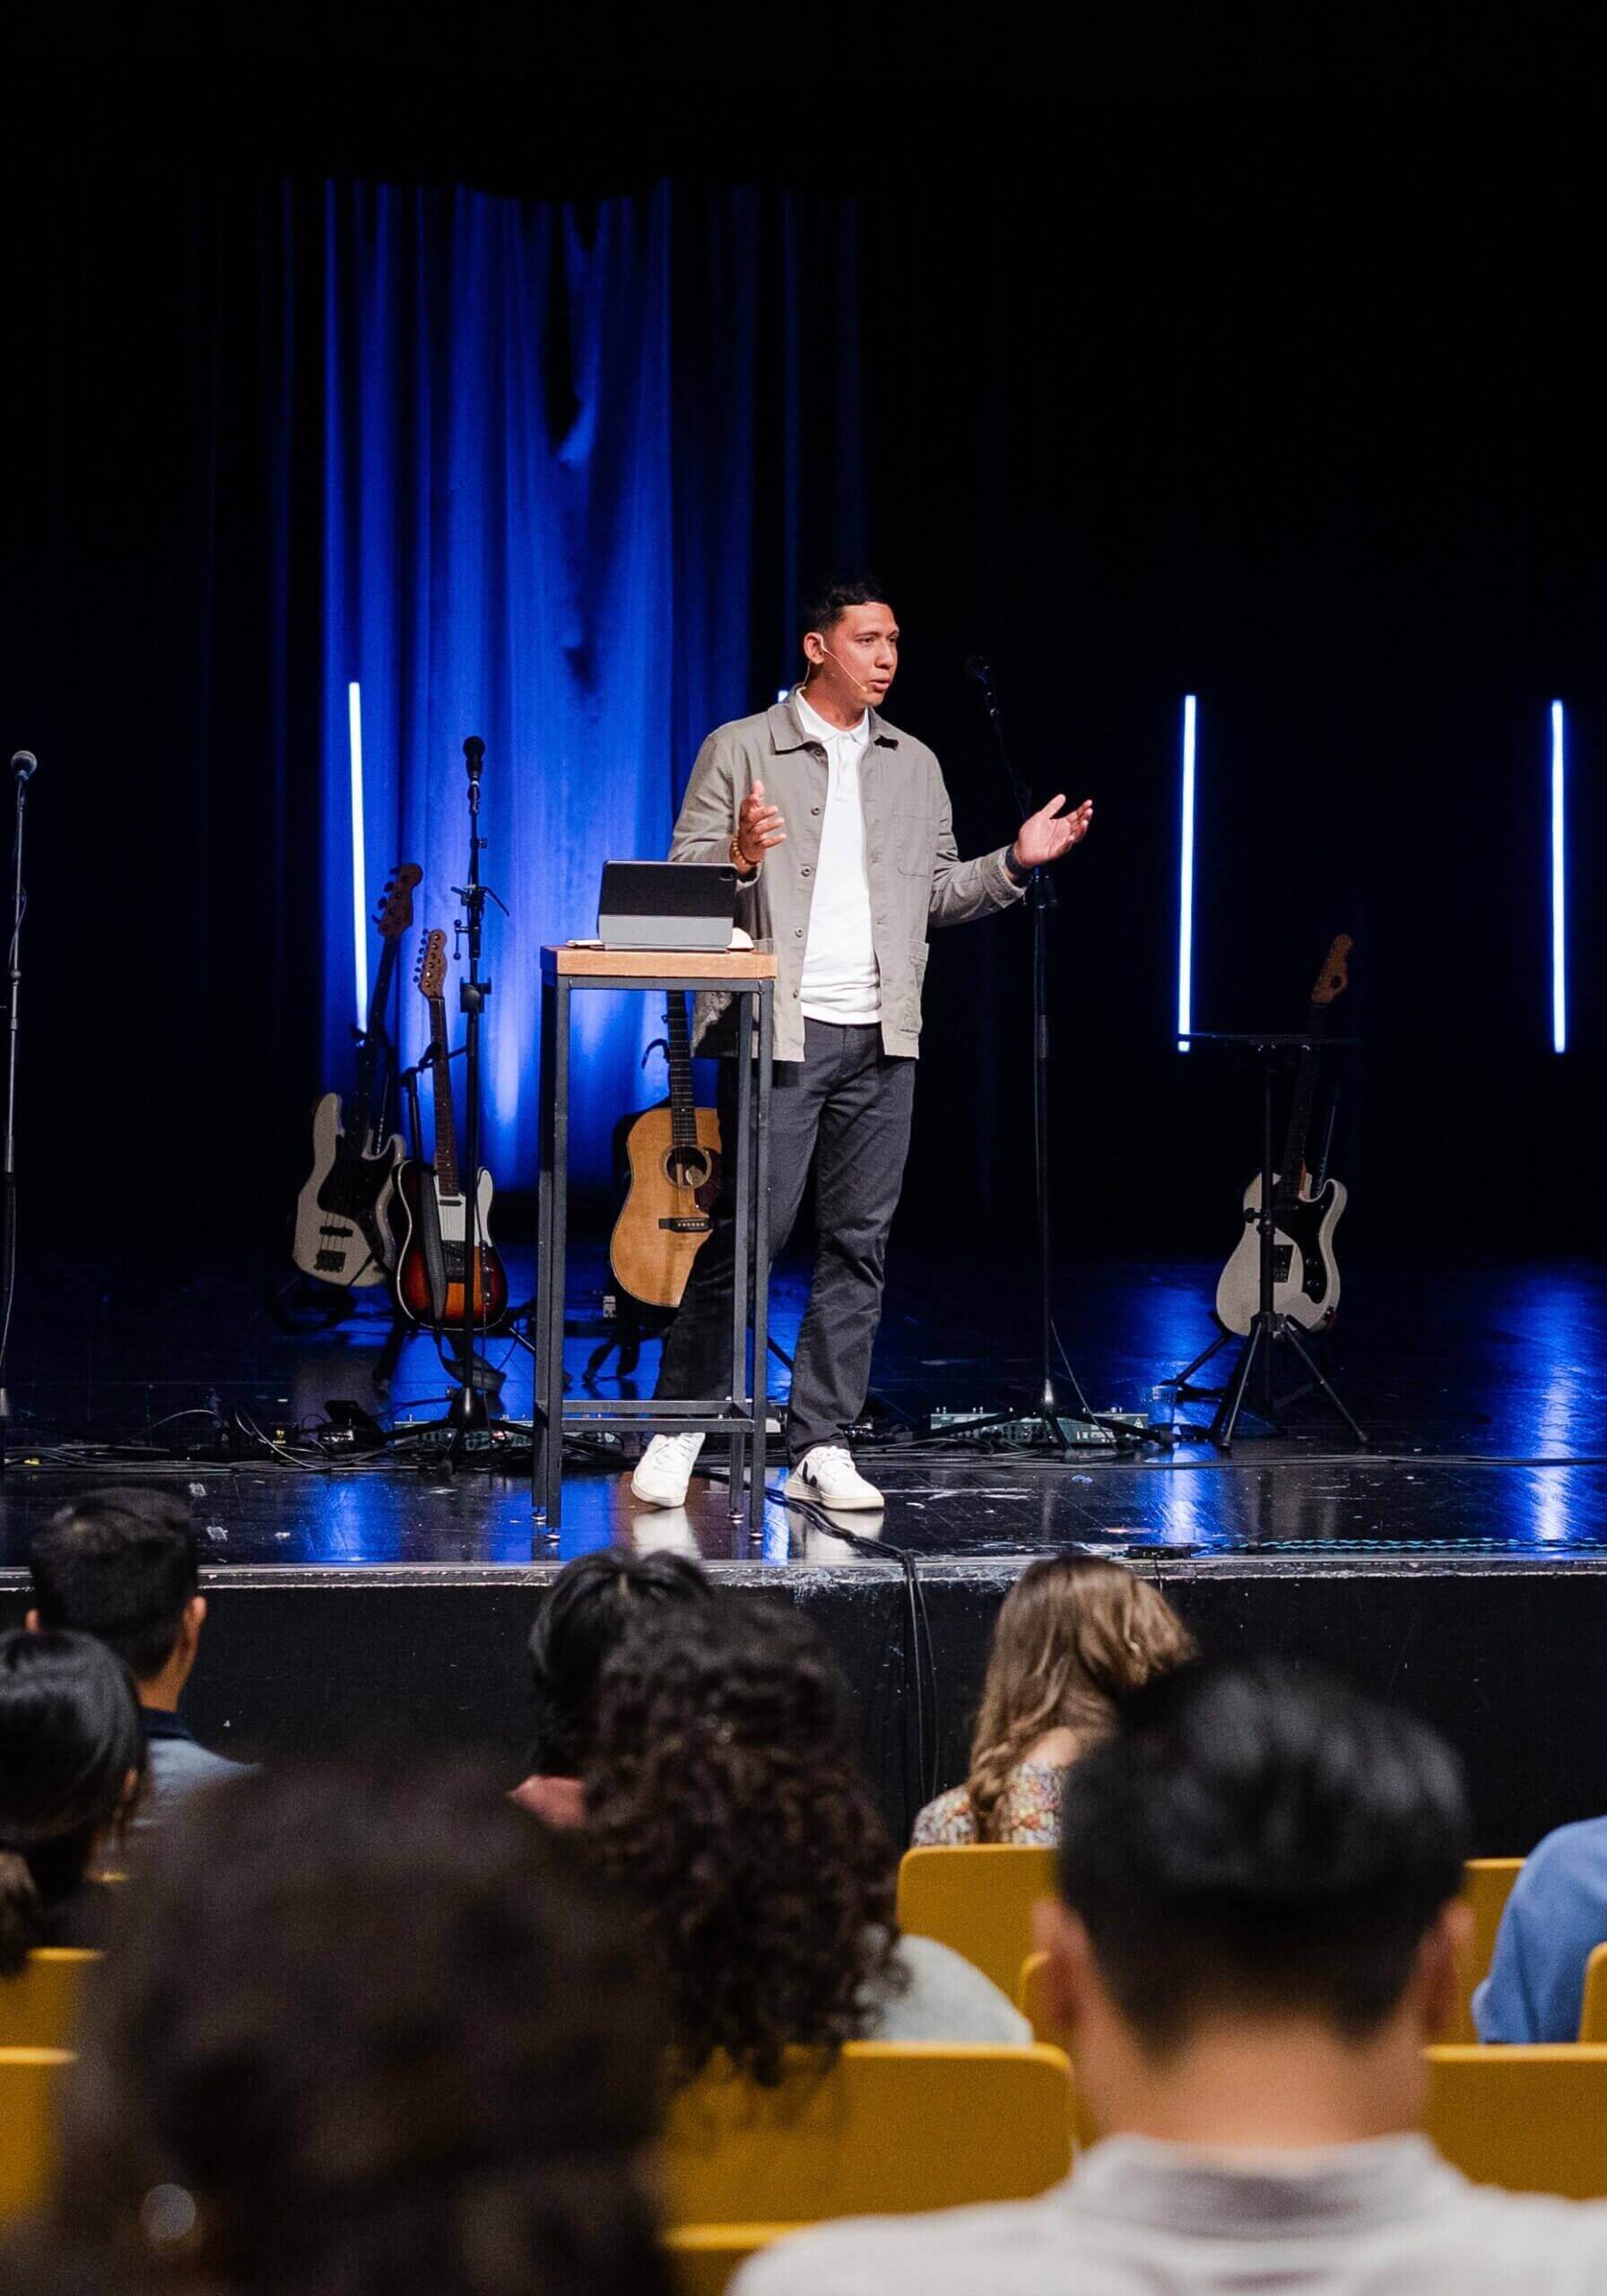 A pastor preaching on stage in front of an audience